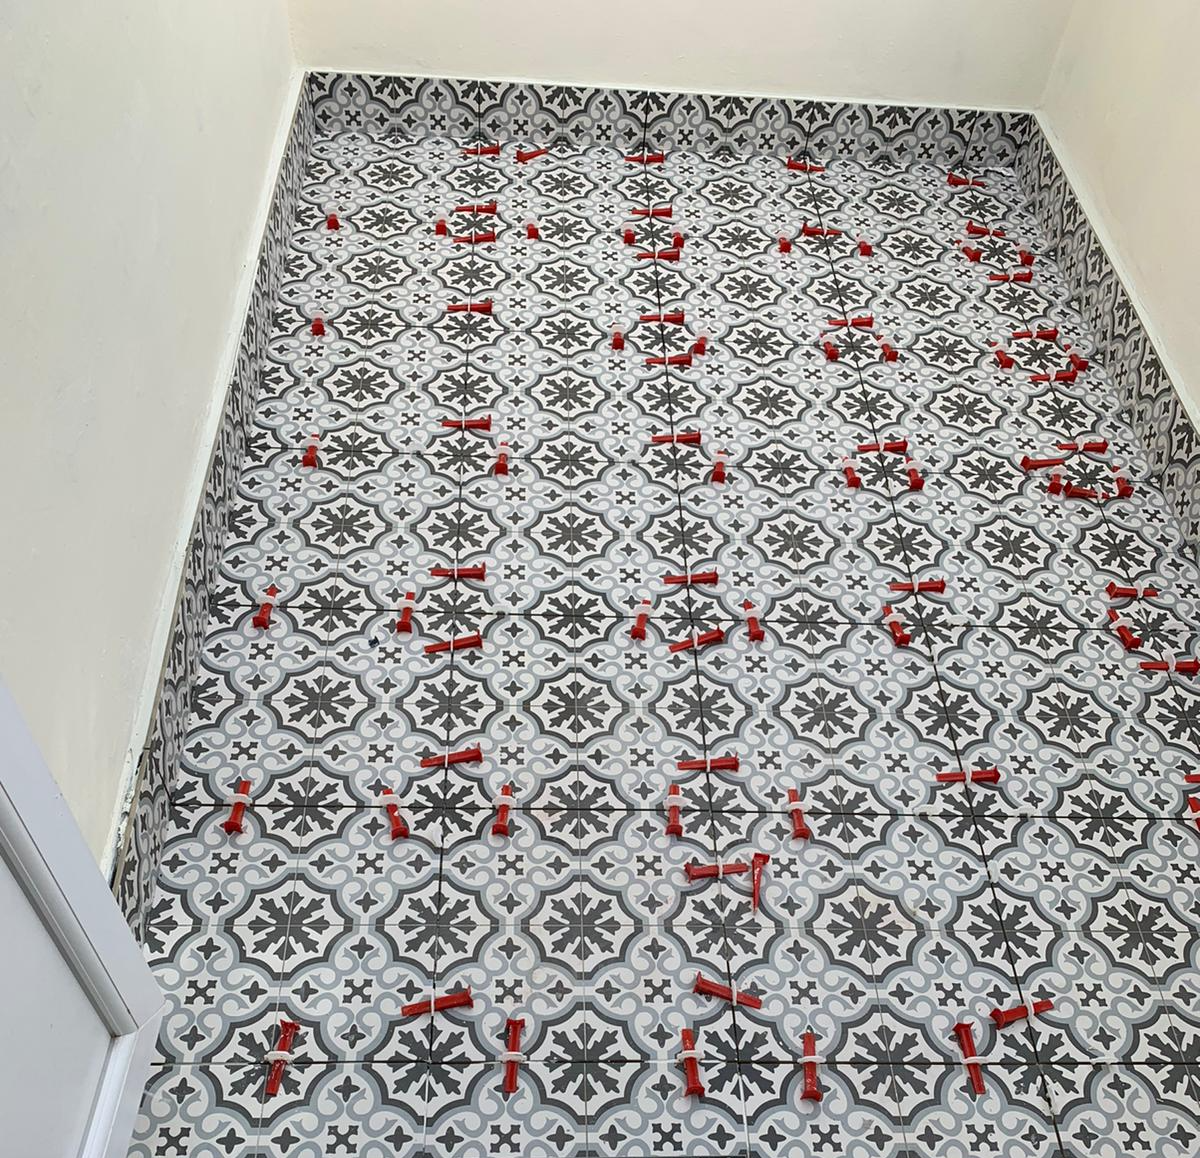 This is a photo of a complete tiling project by Brighton & Hove tiling. Photo was taken in Brighton